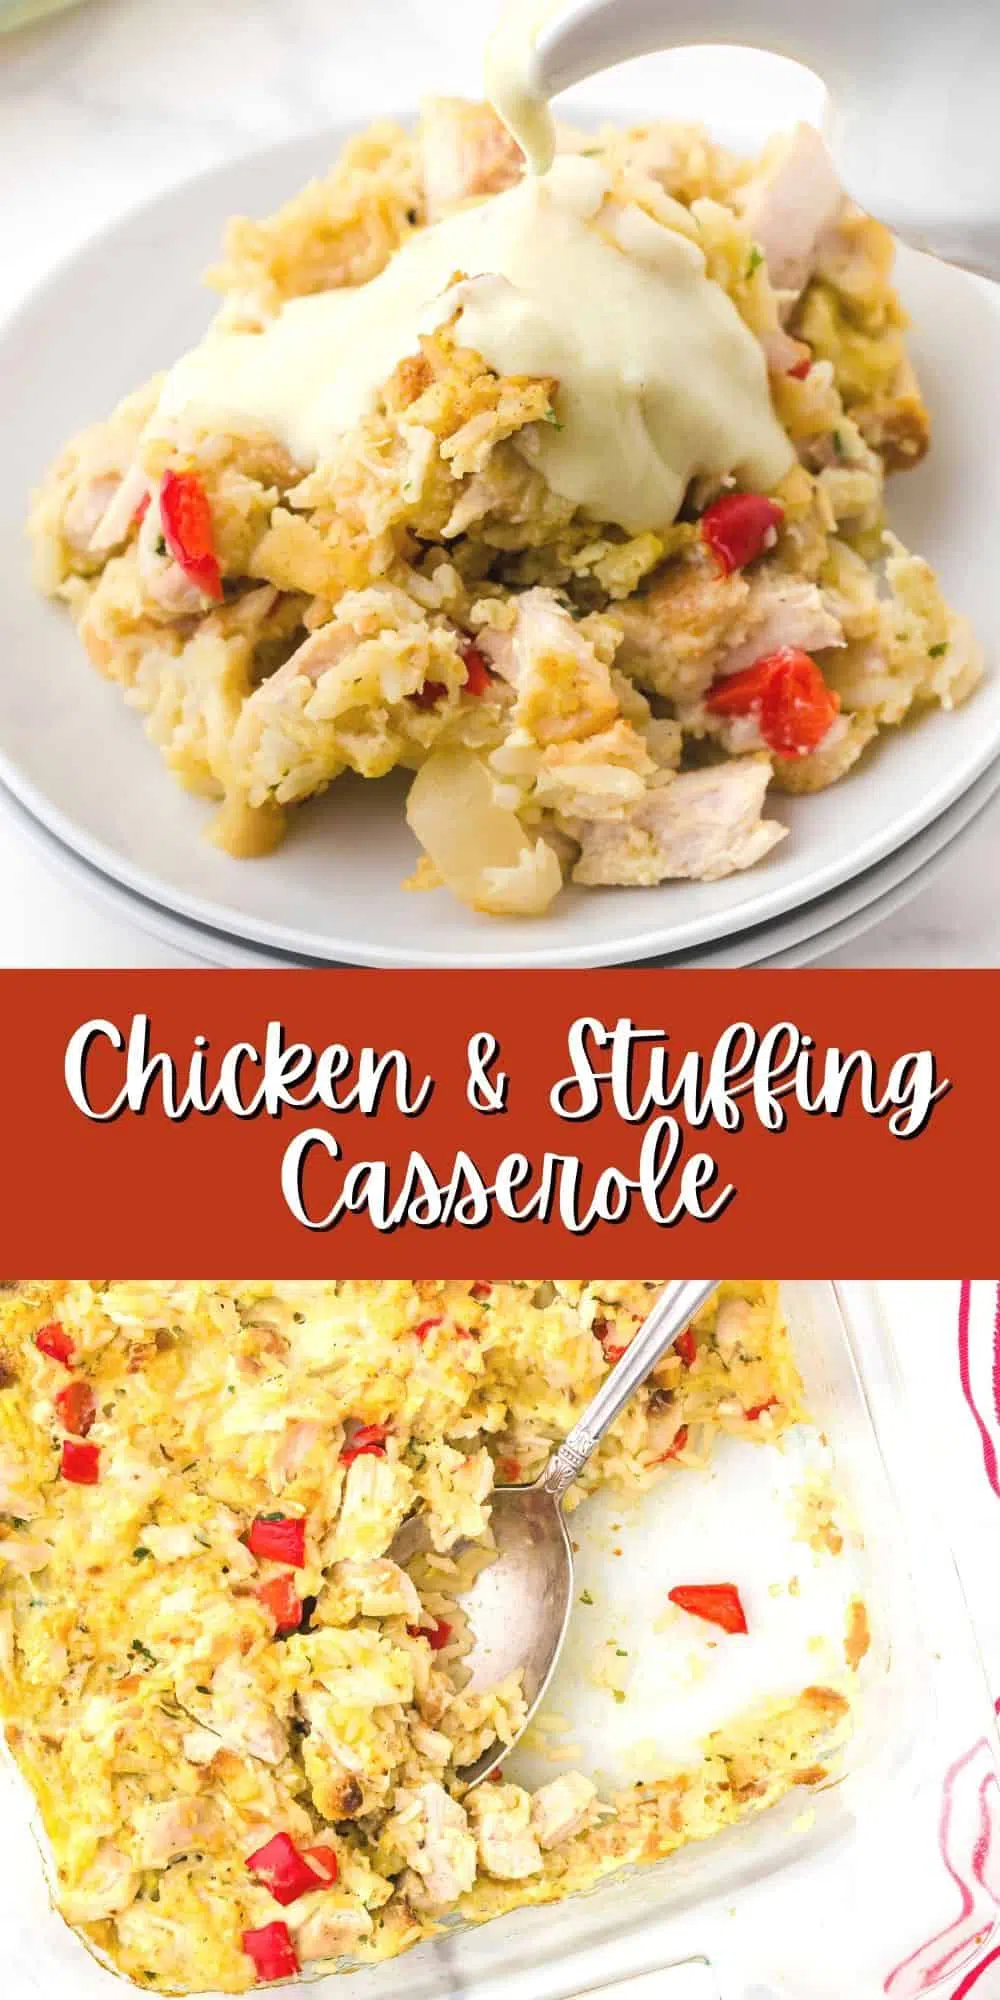 Chicken and Stuffing Casserole Recipe with rice and homemade sauce